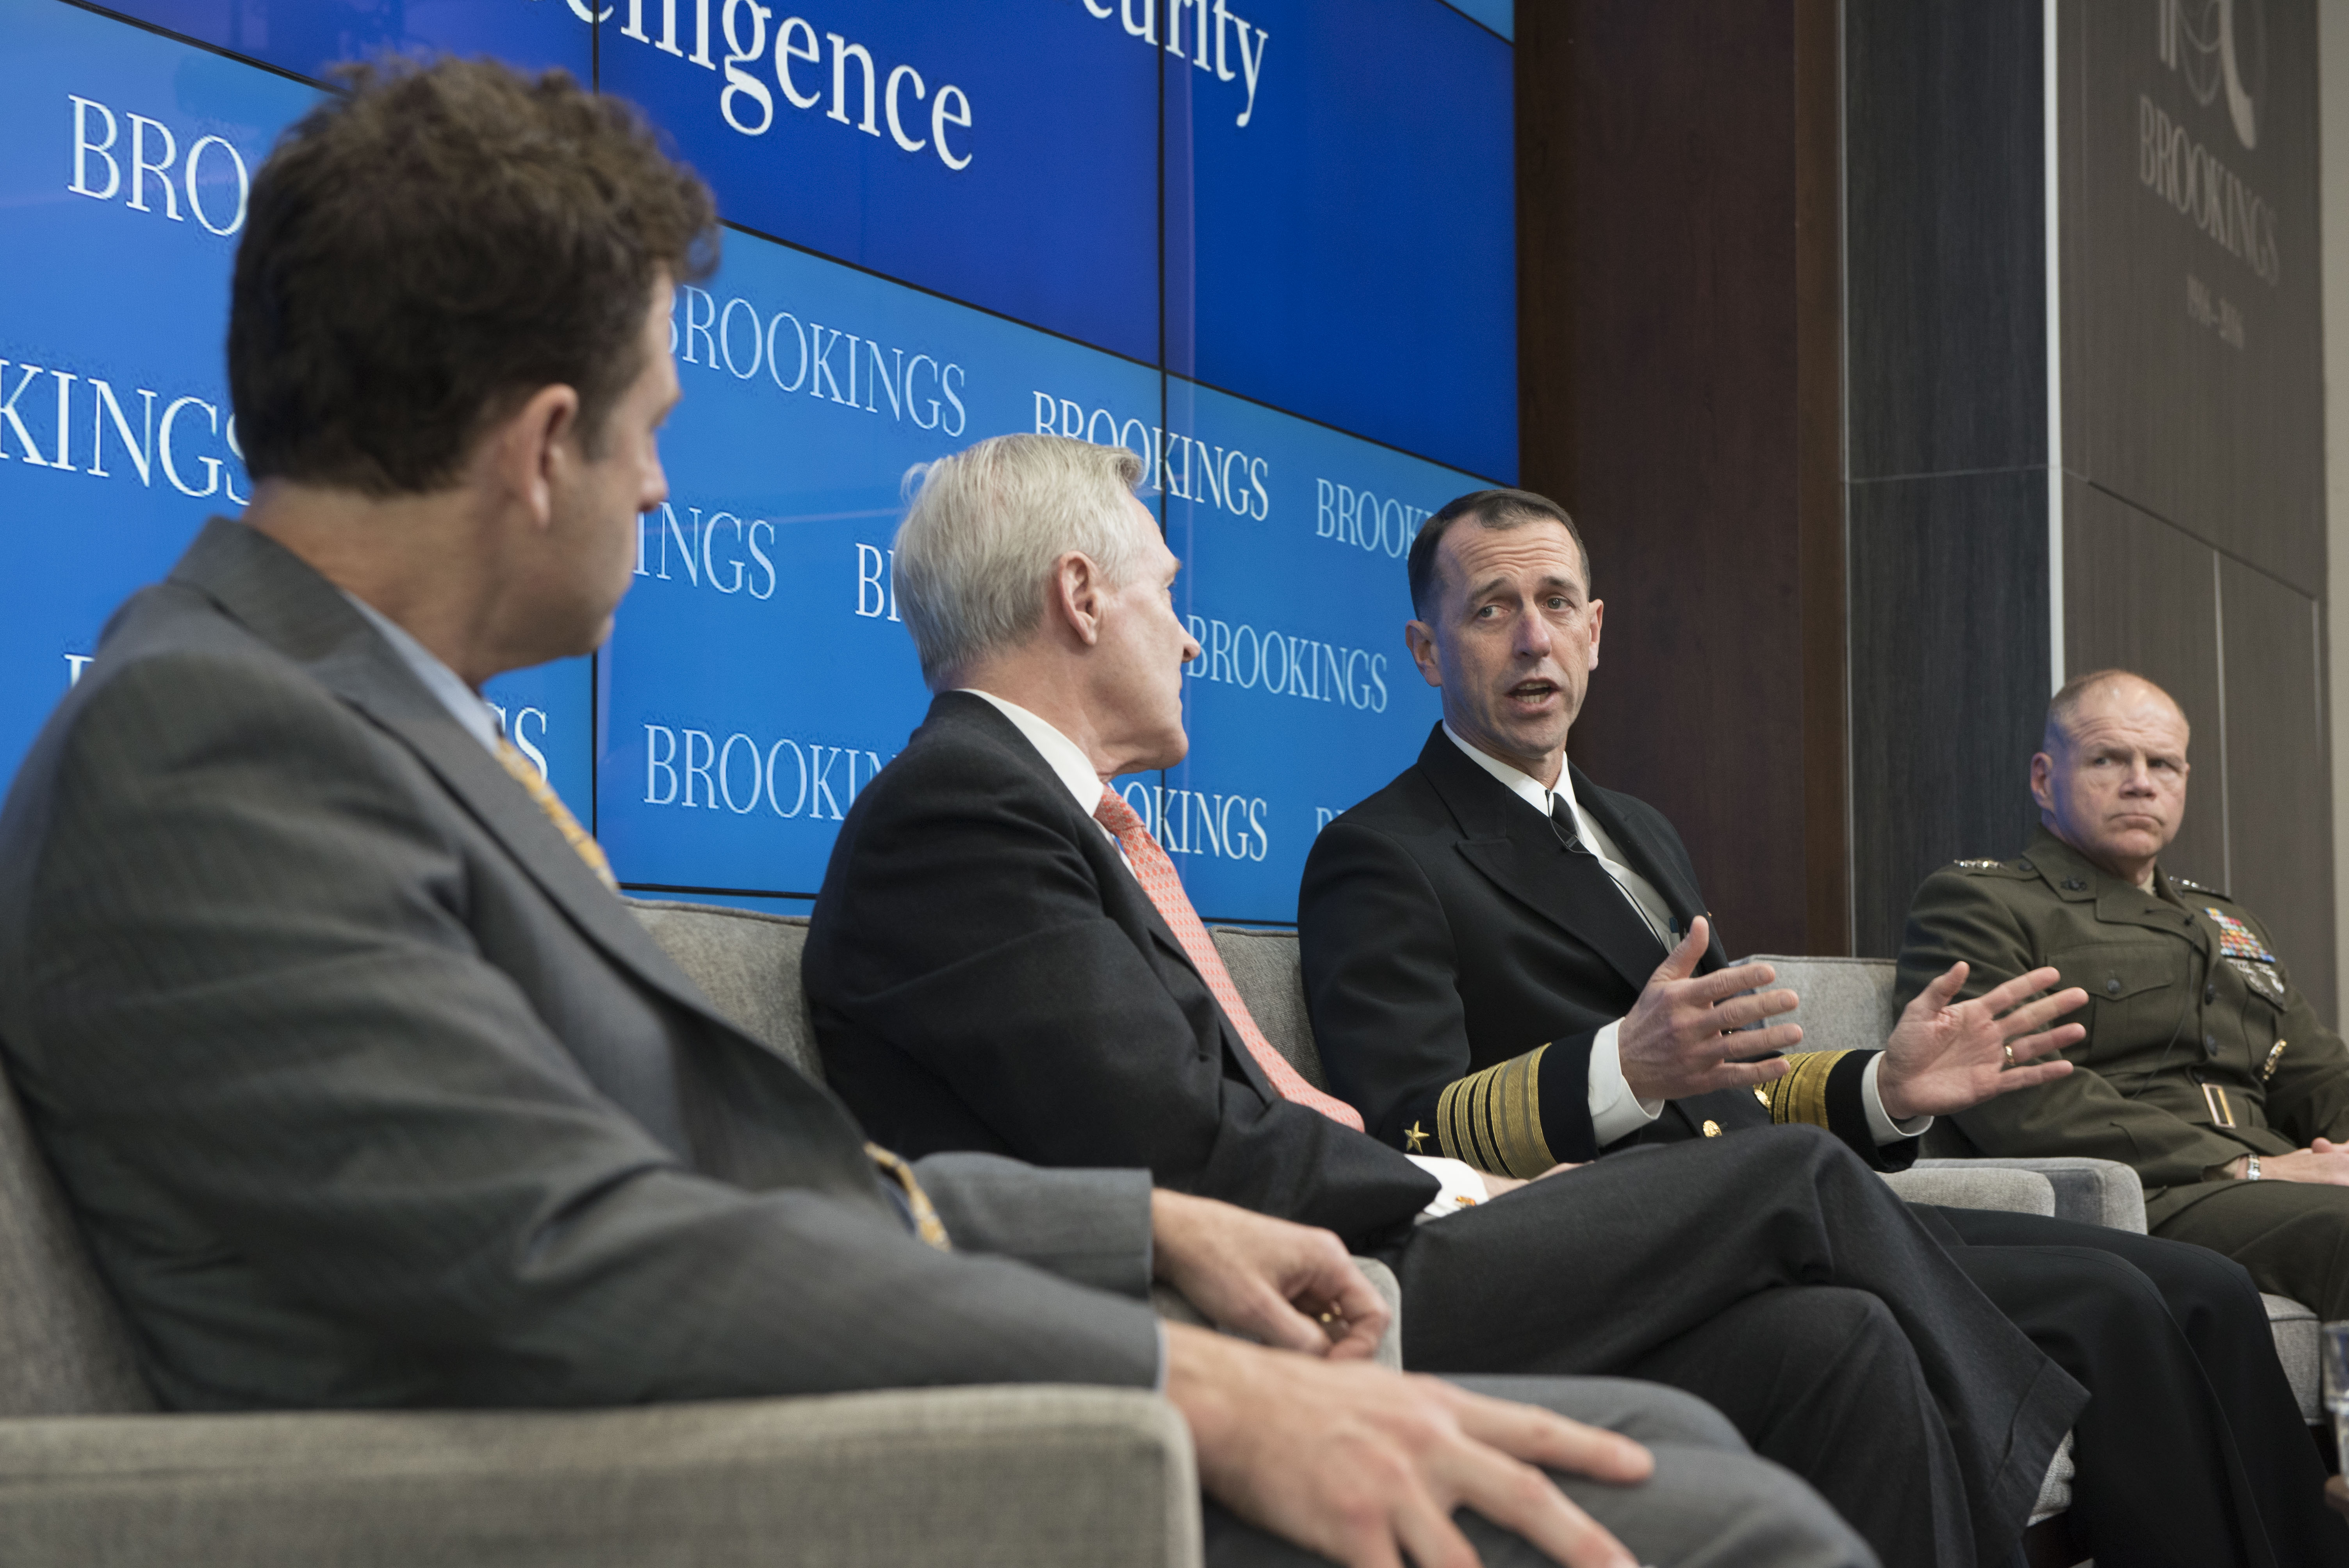 Chief of Naval Operations Adm. John Richardson speaks on maritime military strategy at the Brookings Institute in Washington D.C. with Secretary of the Navy Ray Mabus and Commandant of the Marine Corps Gen. Robert Neller. US Navy photo.